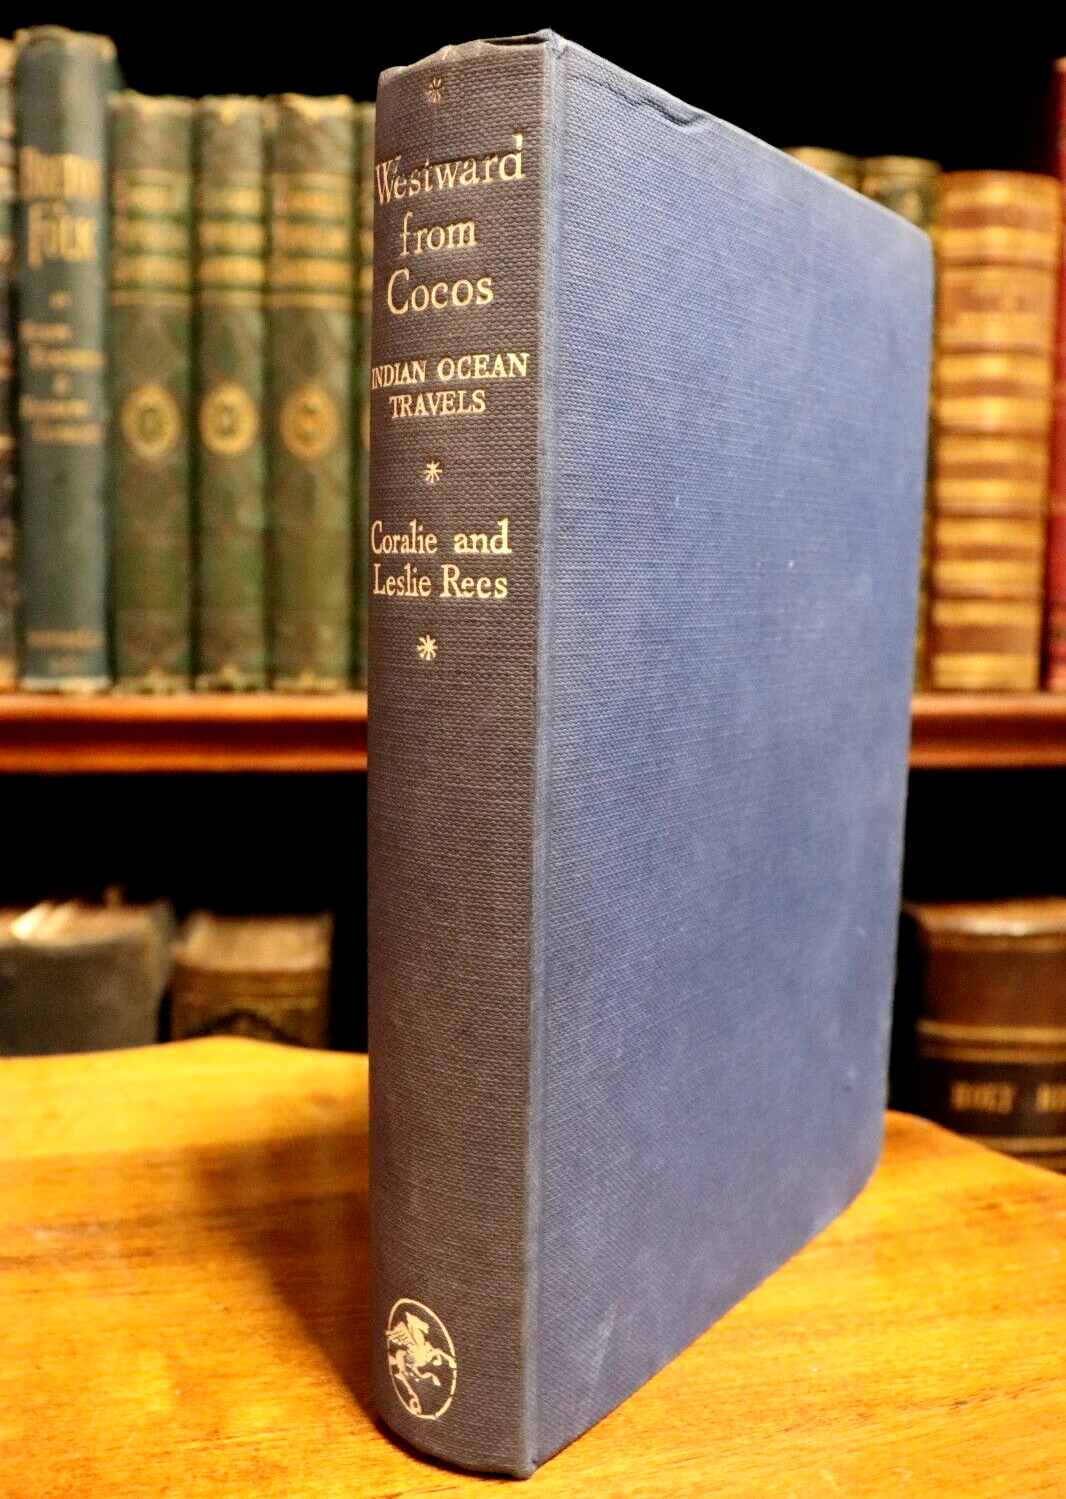 1956 Westward From Cocos by C&L Rees 1st Edition Travel Book Indian Ocean